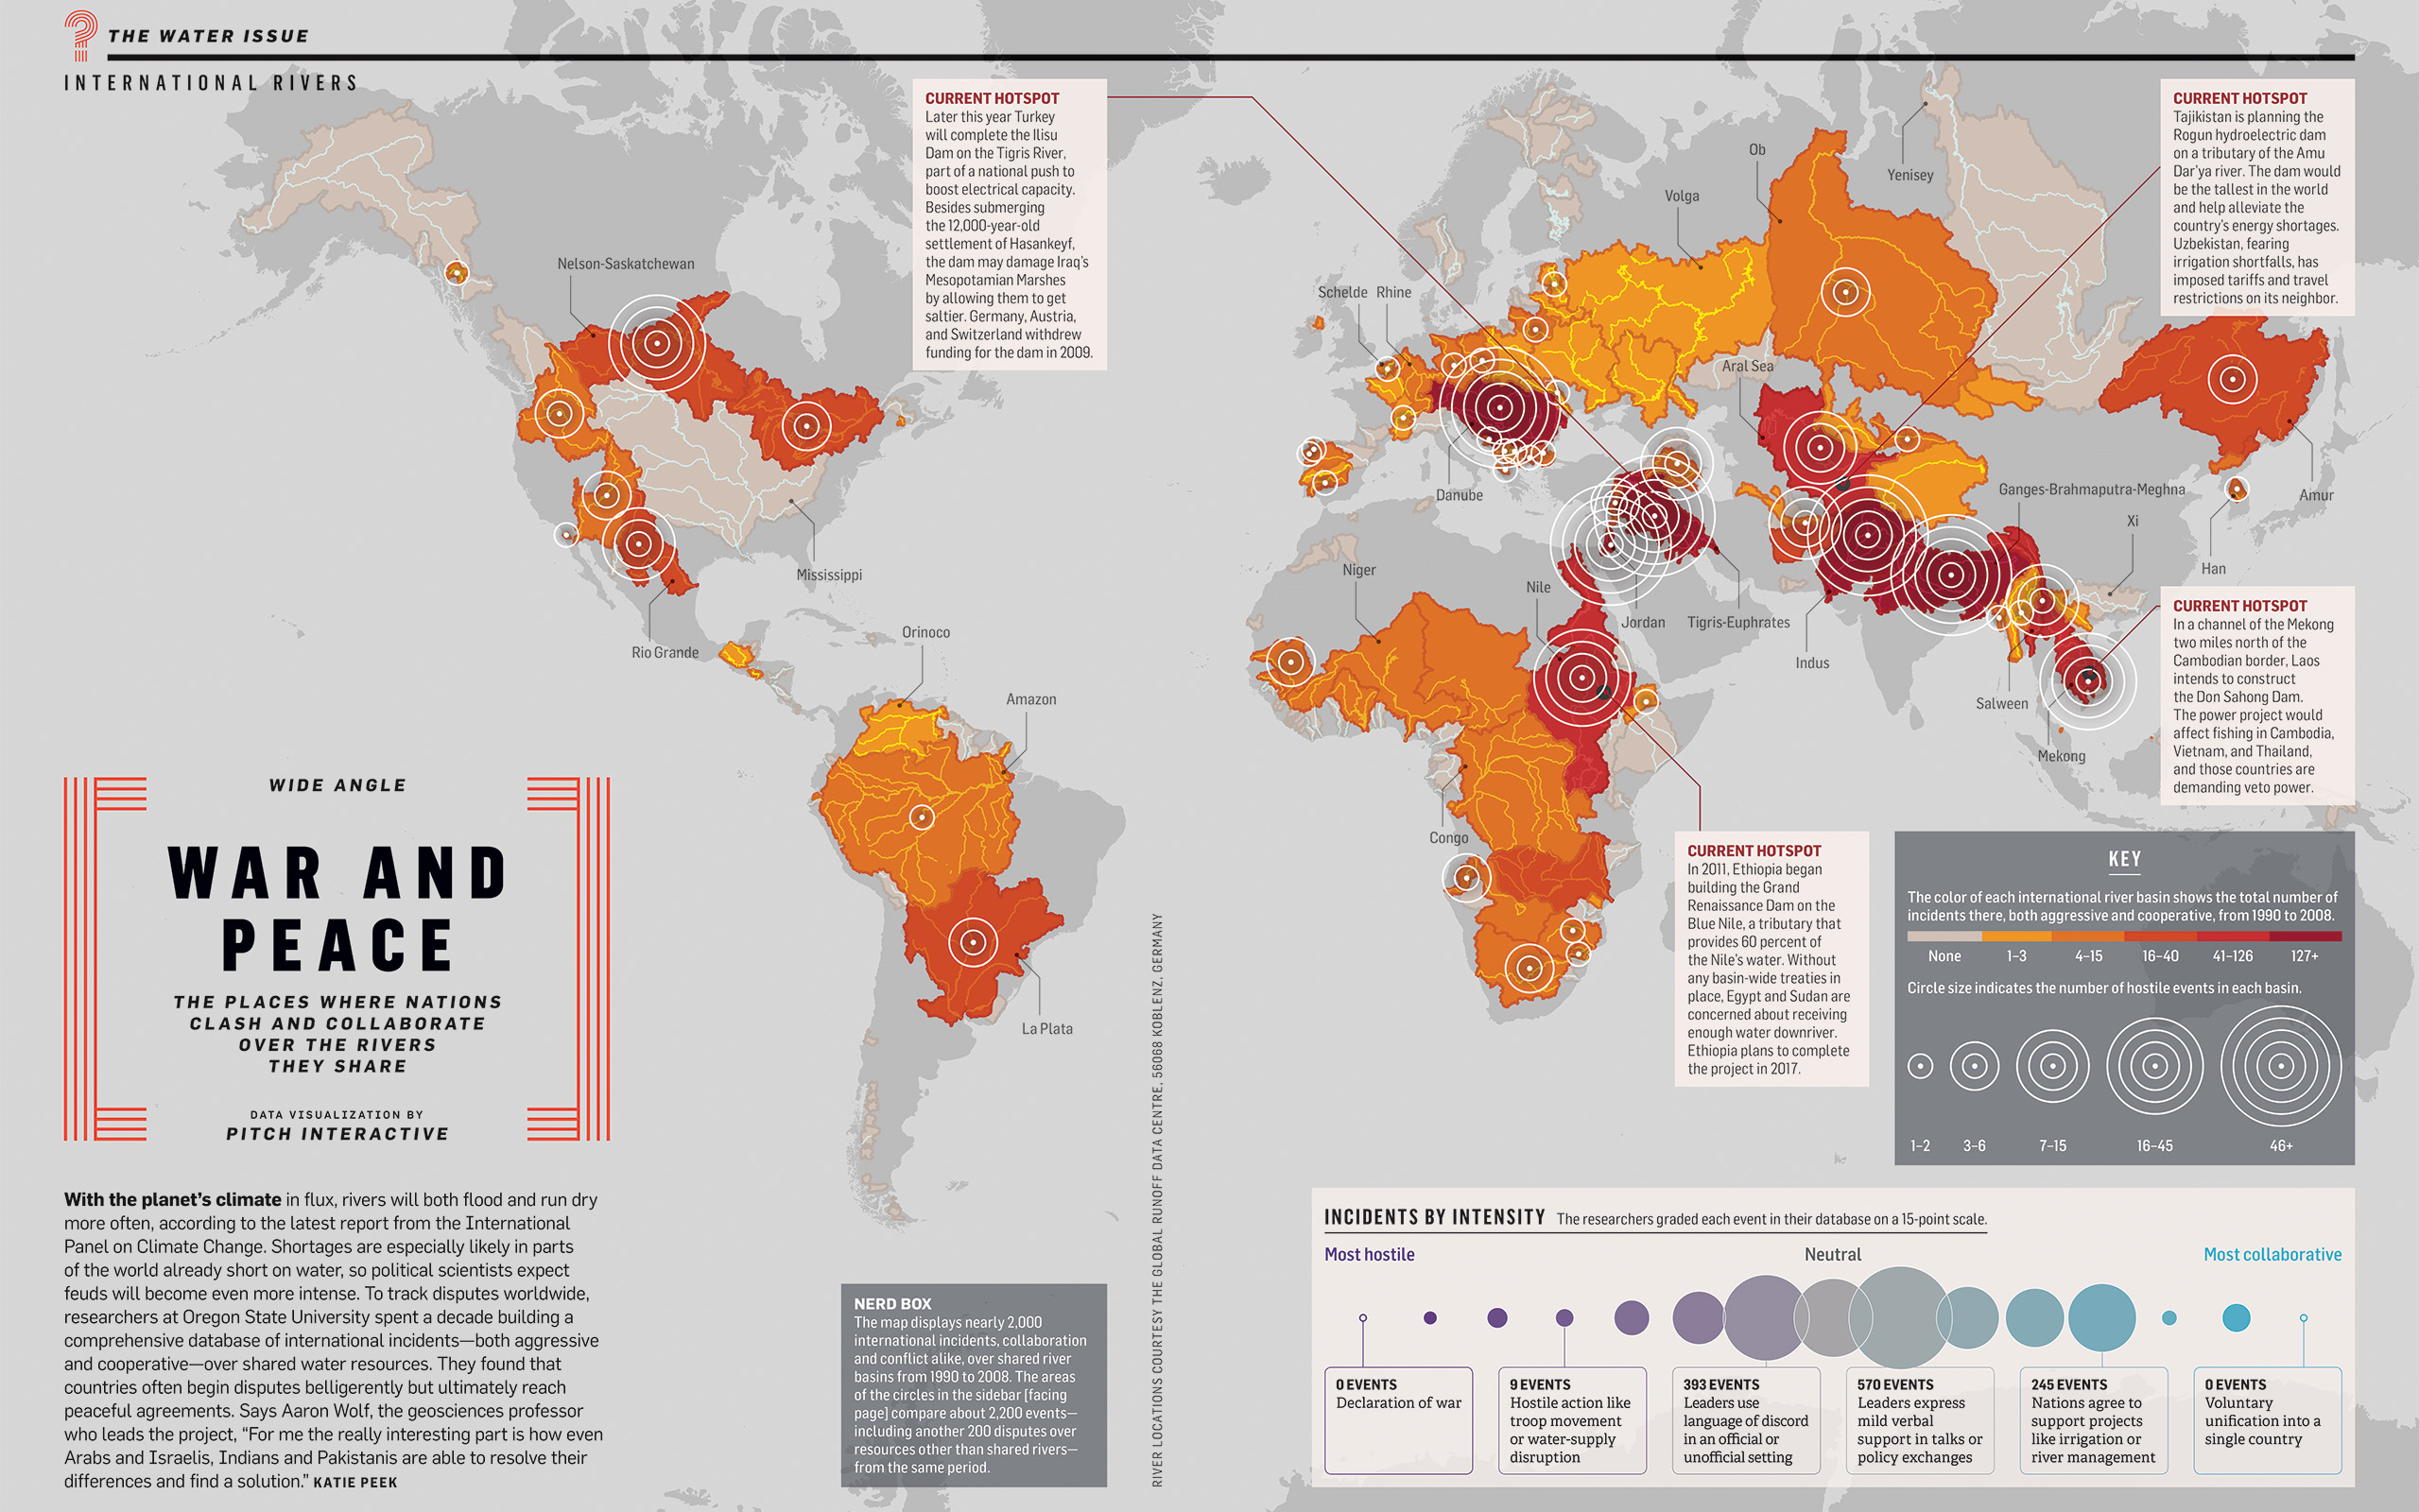 Where Will The World's Water Conflicts Erupt? #1